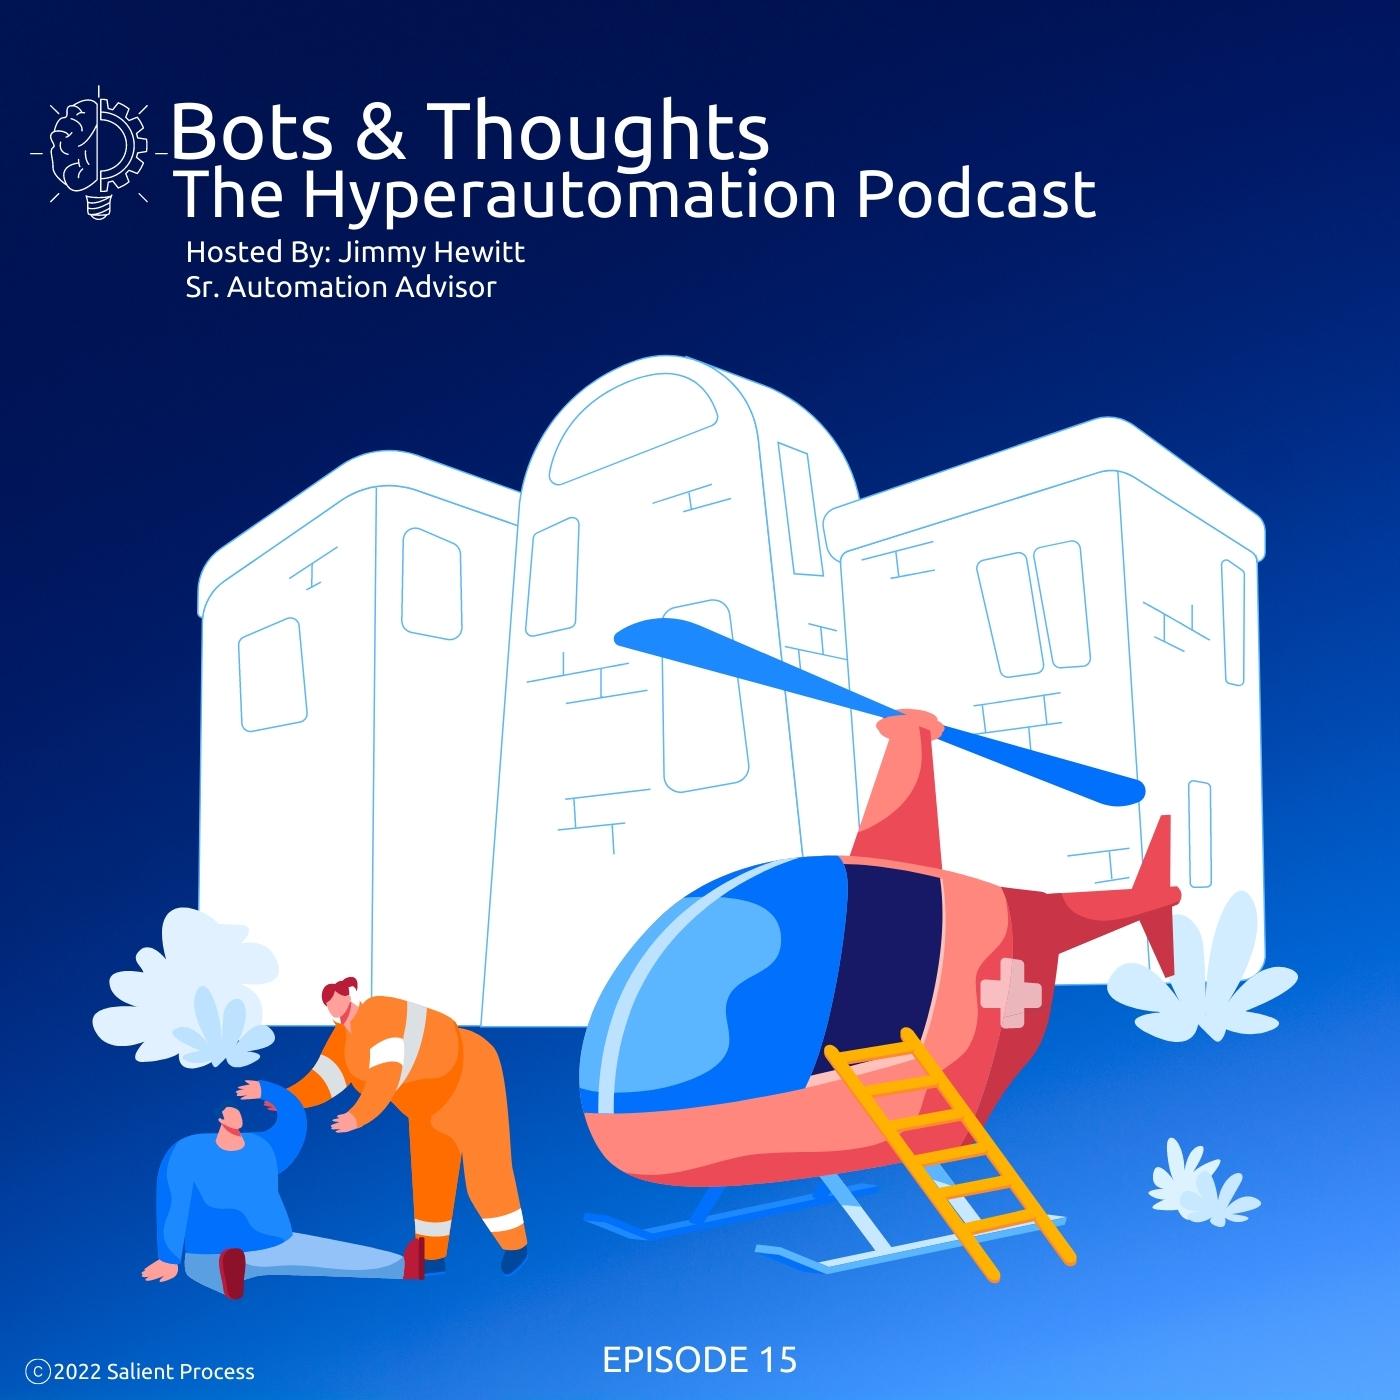 Bots & Thoughts: The Hyperautomation Podcast, Hosted by Jimmy Hewitt (Sr. Automation Advisor) - Episode 15 - Cover Art